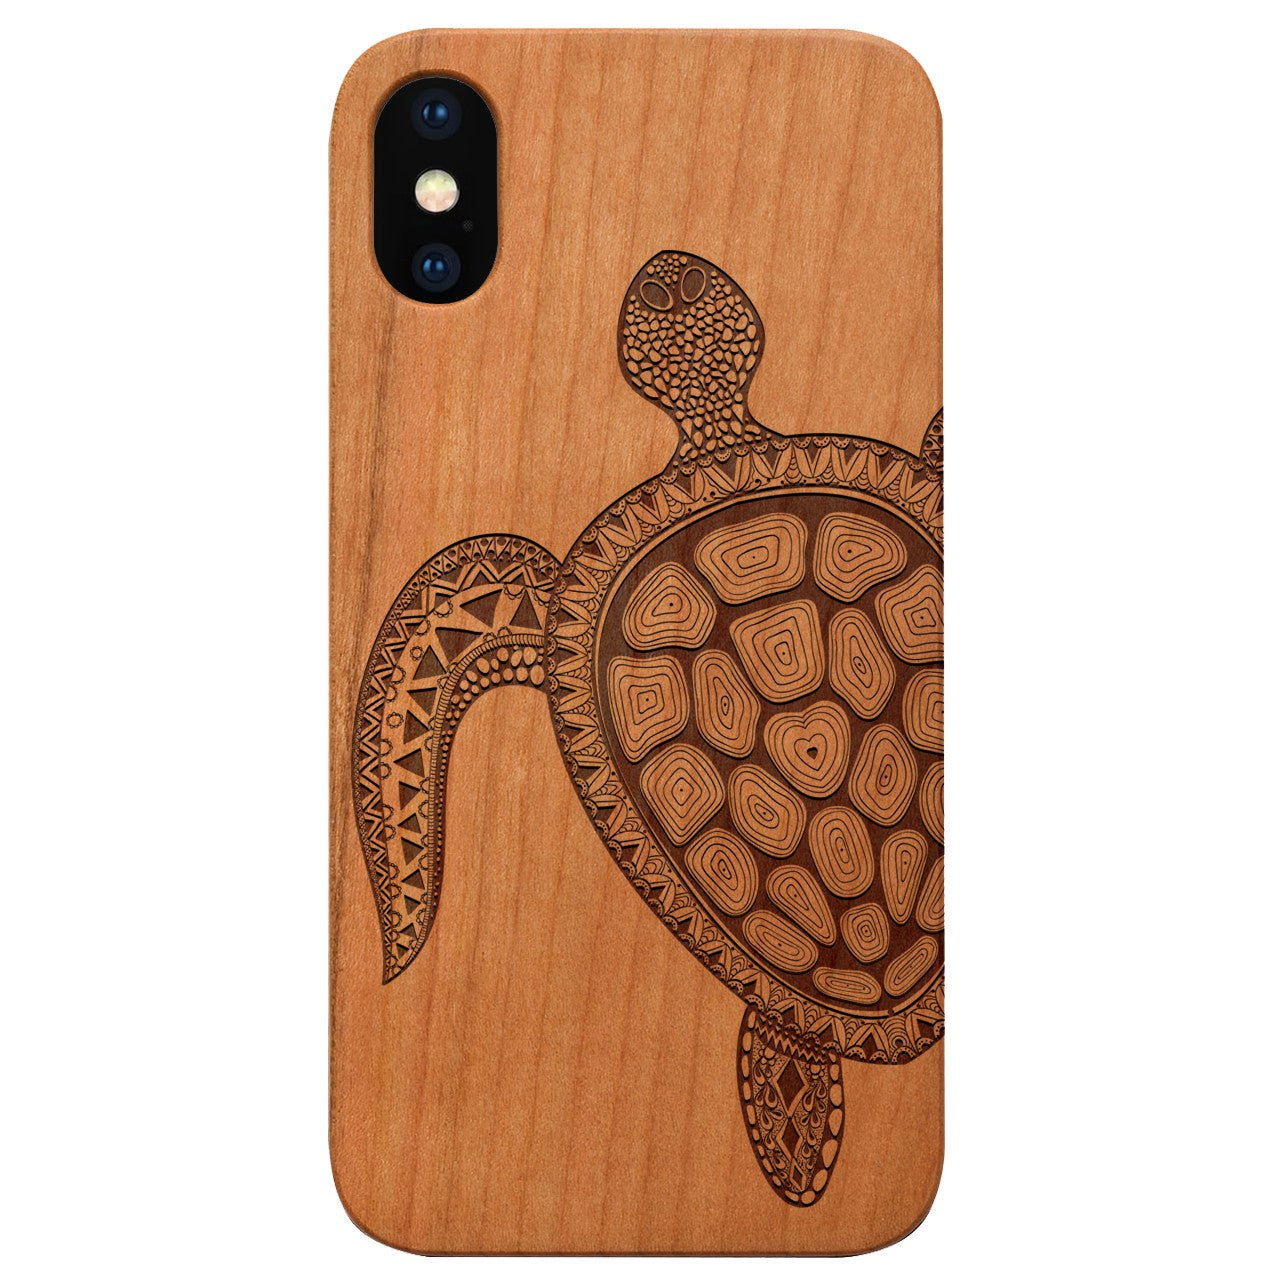  Turtle 3 - Engraved - Wooden Phone Case - IPhone 13 Models